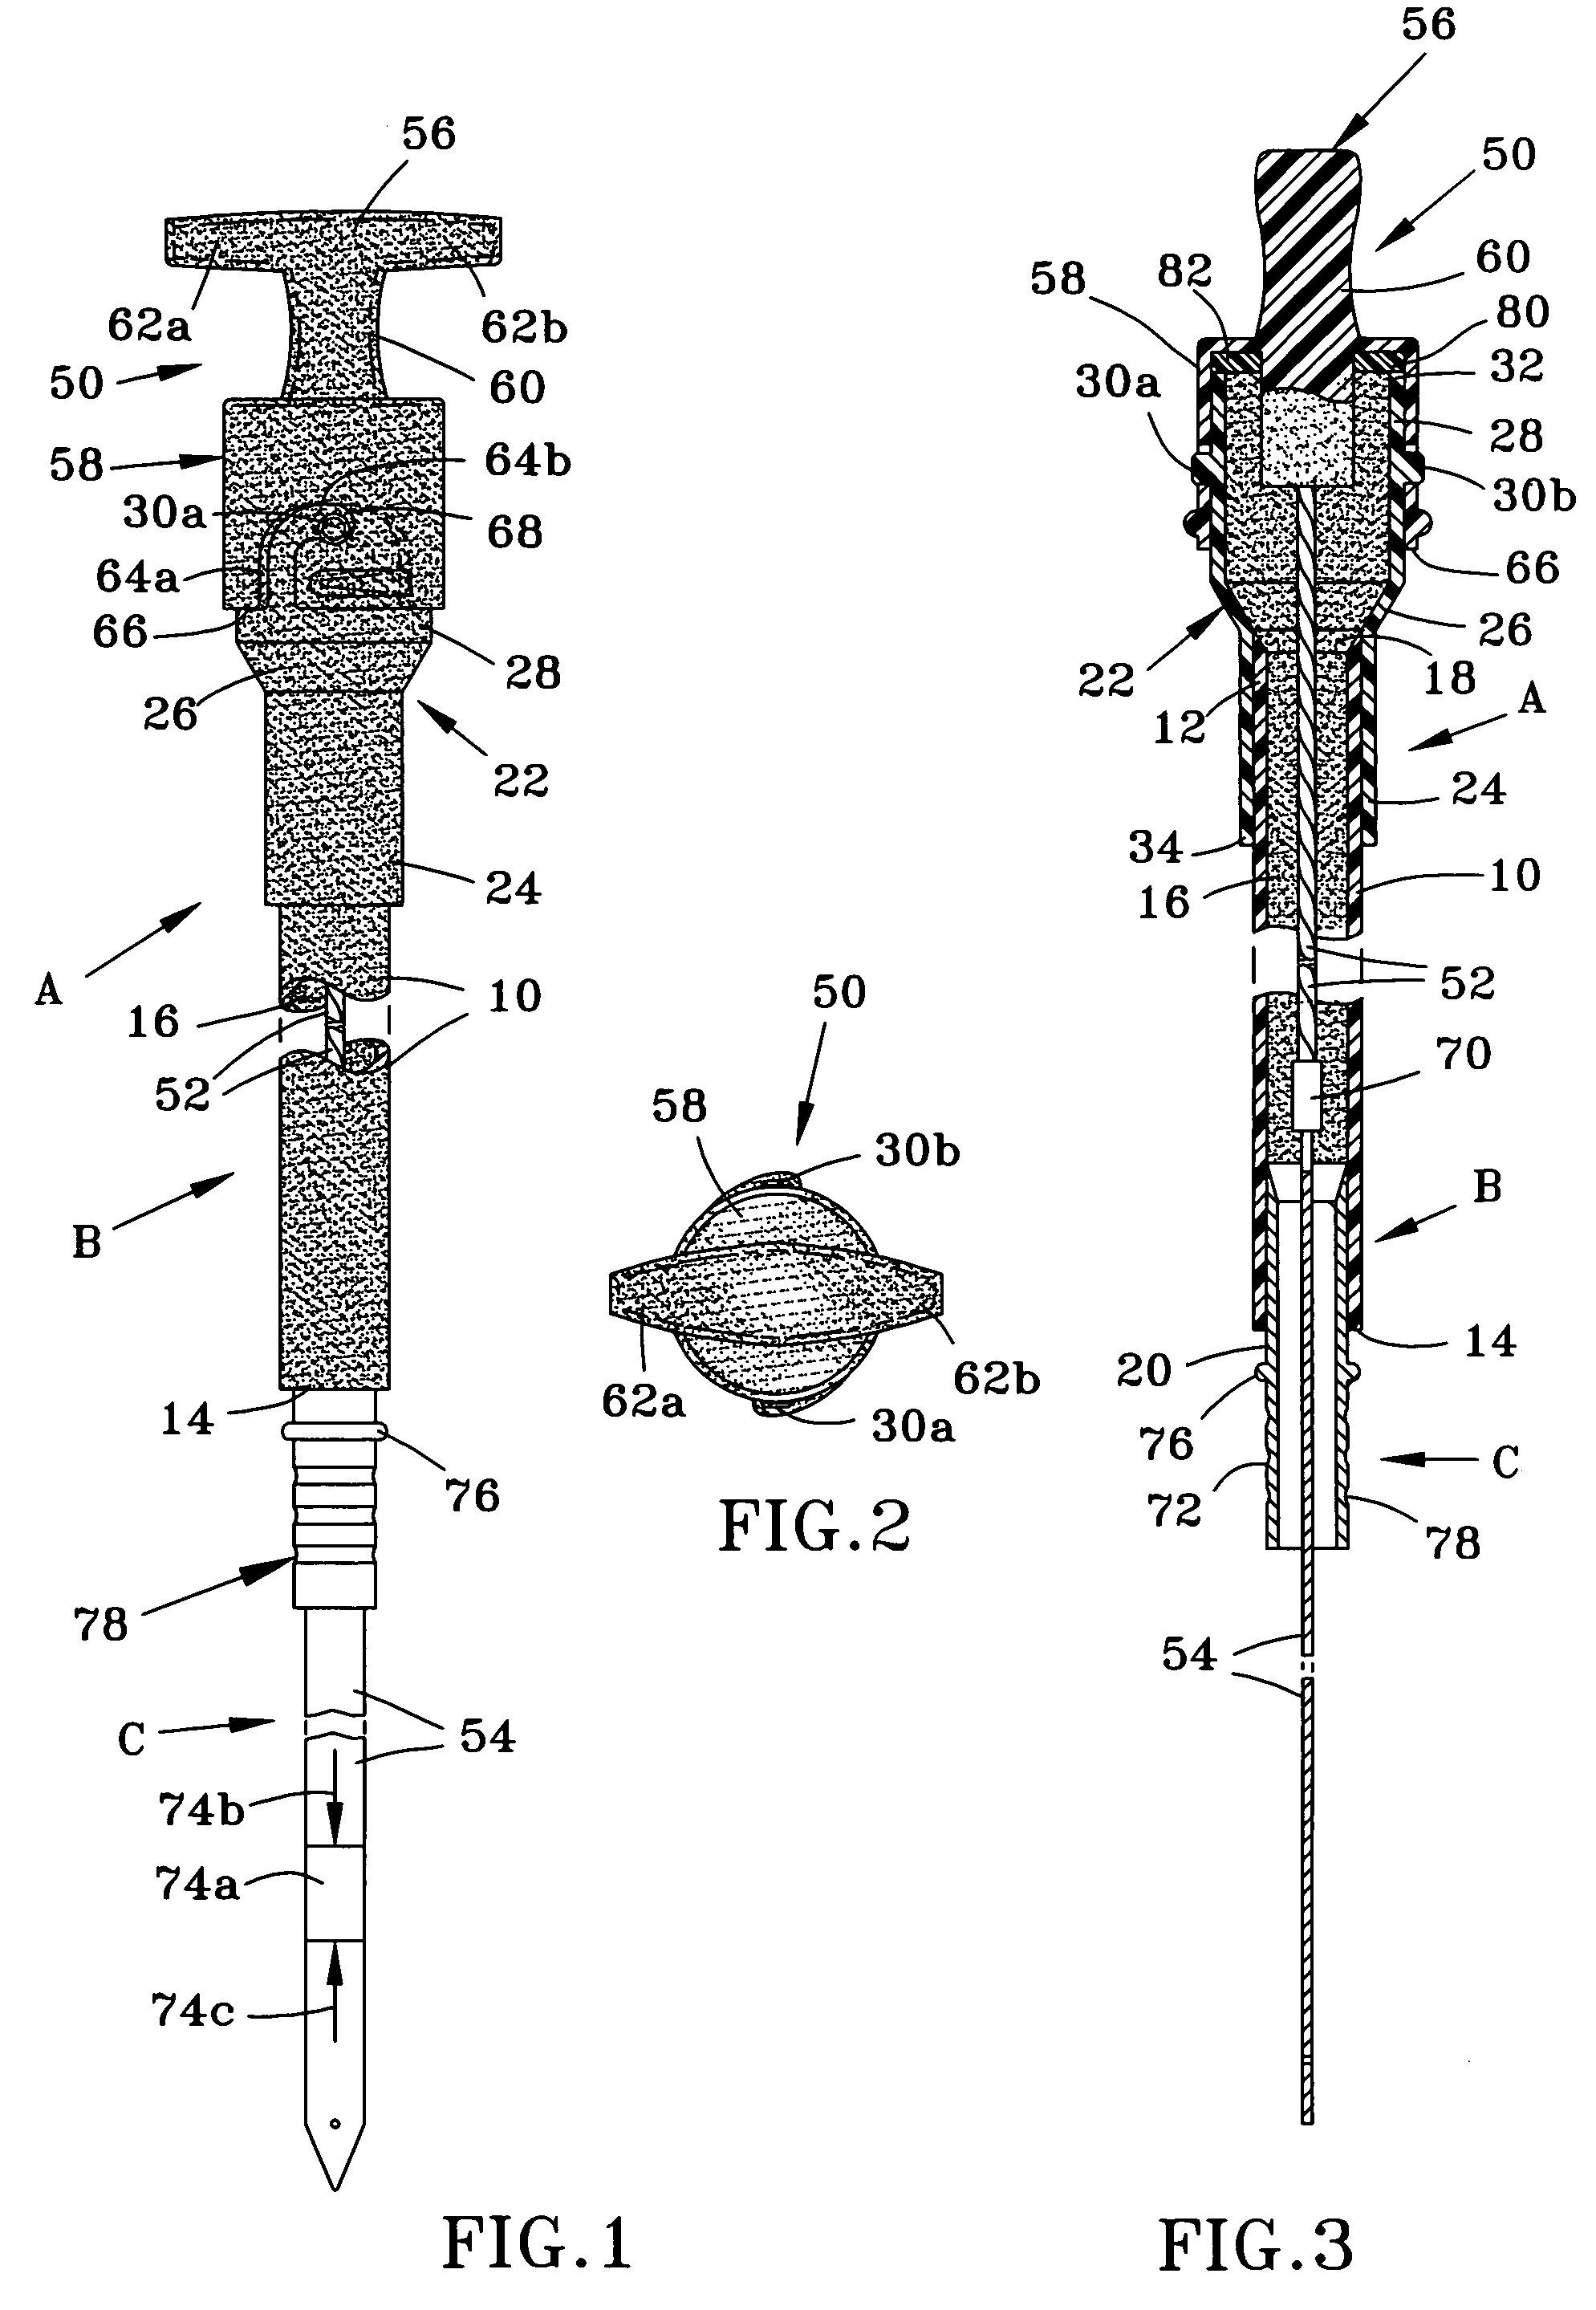 Fluid level measuring device having at least one compressible member